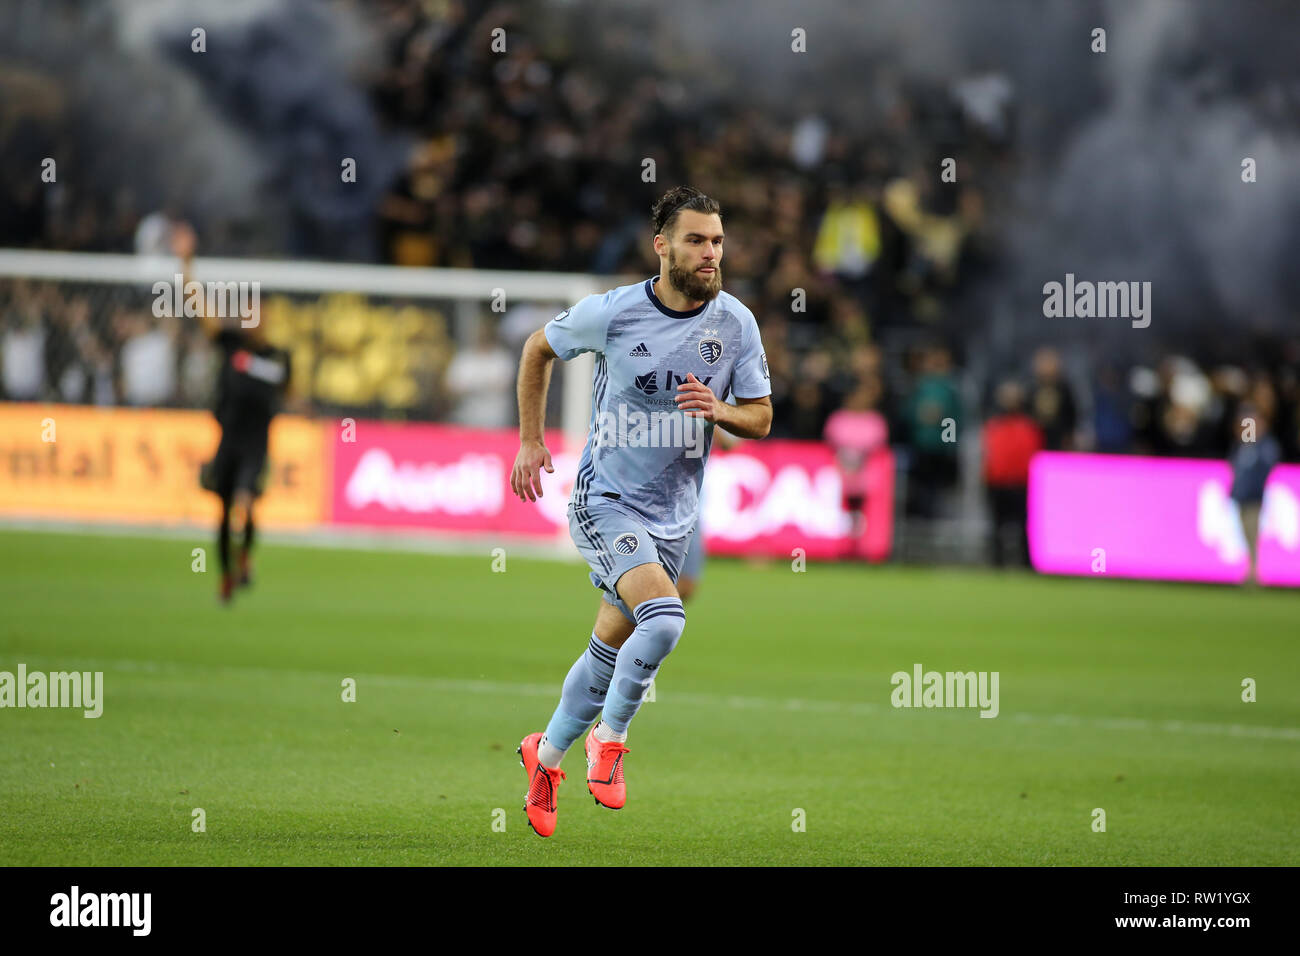 Los Angeles, CA, USA. 03rd Mar, 2019. MLS 2019:Sporting Kansas City midfielder Graham Zusi #8 during the Los Angeles Football Club vs Sporting KC at BANC OF CALIFORNIA Stadium in Los Angeles, Ca on March 03, 2019. Photo by Jevone Moore Credit: csm/Alamy Live News Stock Photo